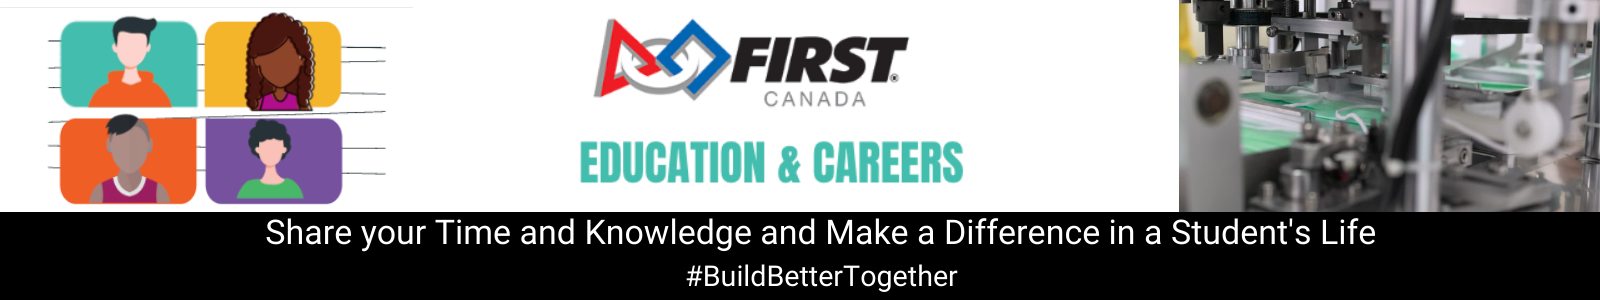 FIRST Canada Education and Careers